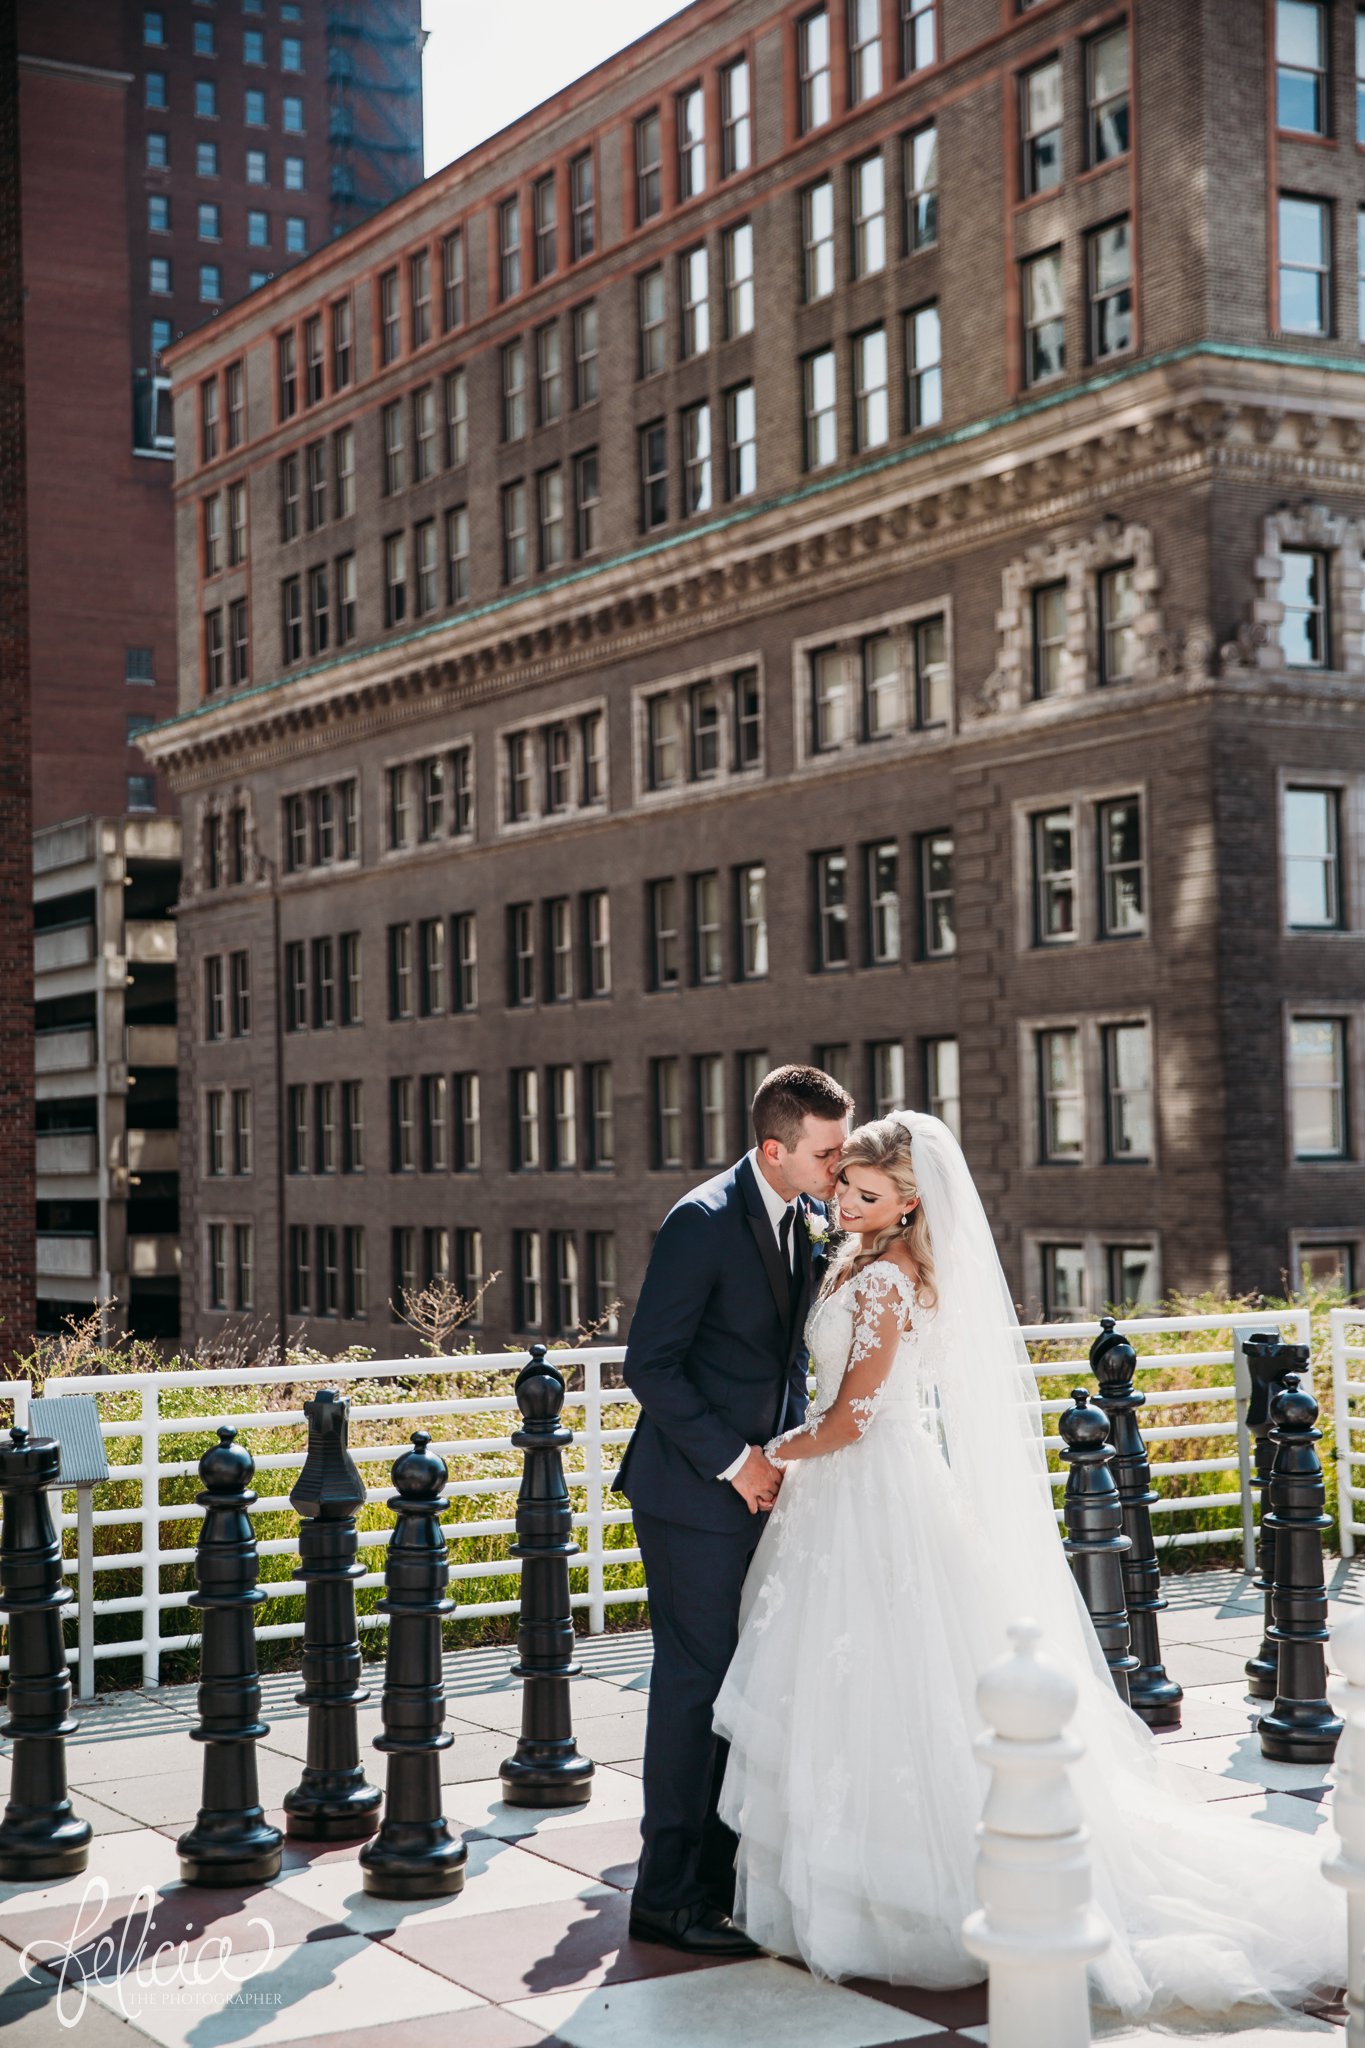 images by feliciathephotographer.com | wedding photographer | kansas city | redemptorist | classic | library | chess board | rooftop | industrial | romantic | portrait | bride and groom | lace long sleeve dress | veil | true love | 